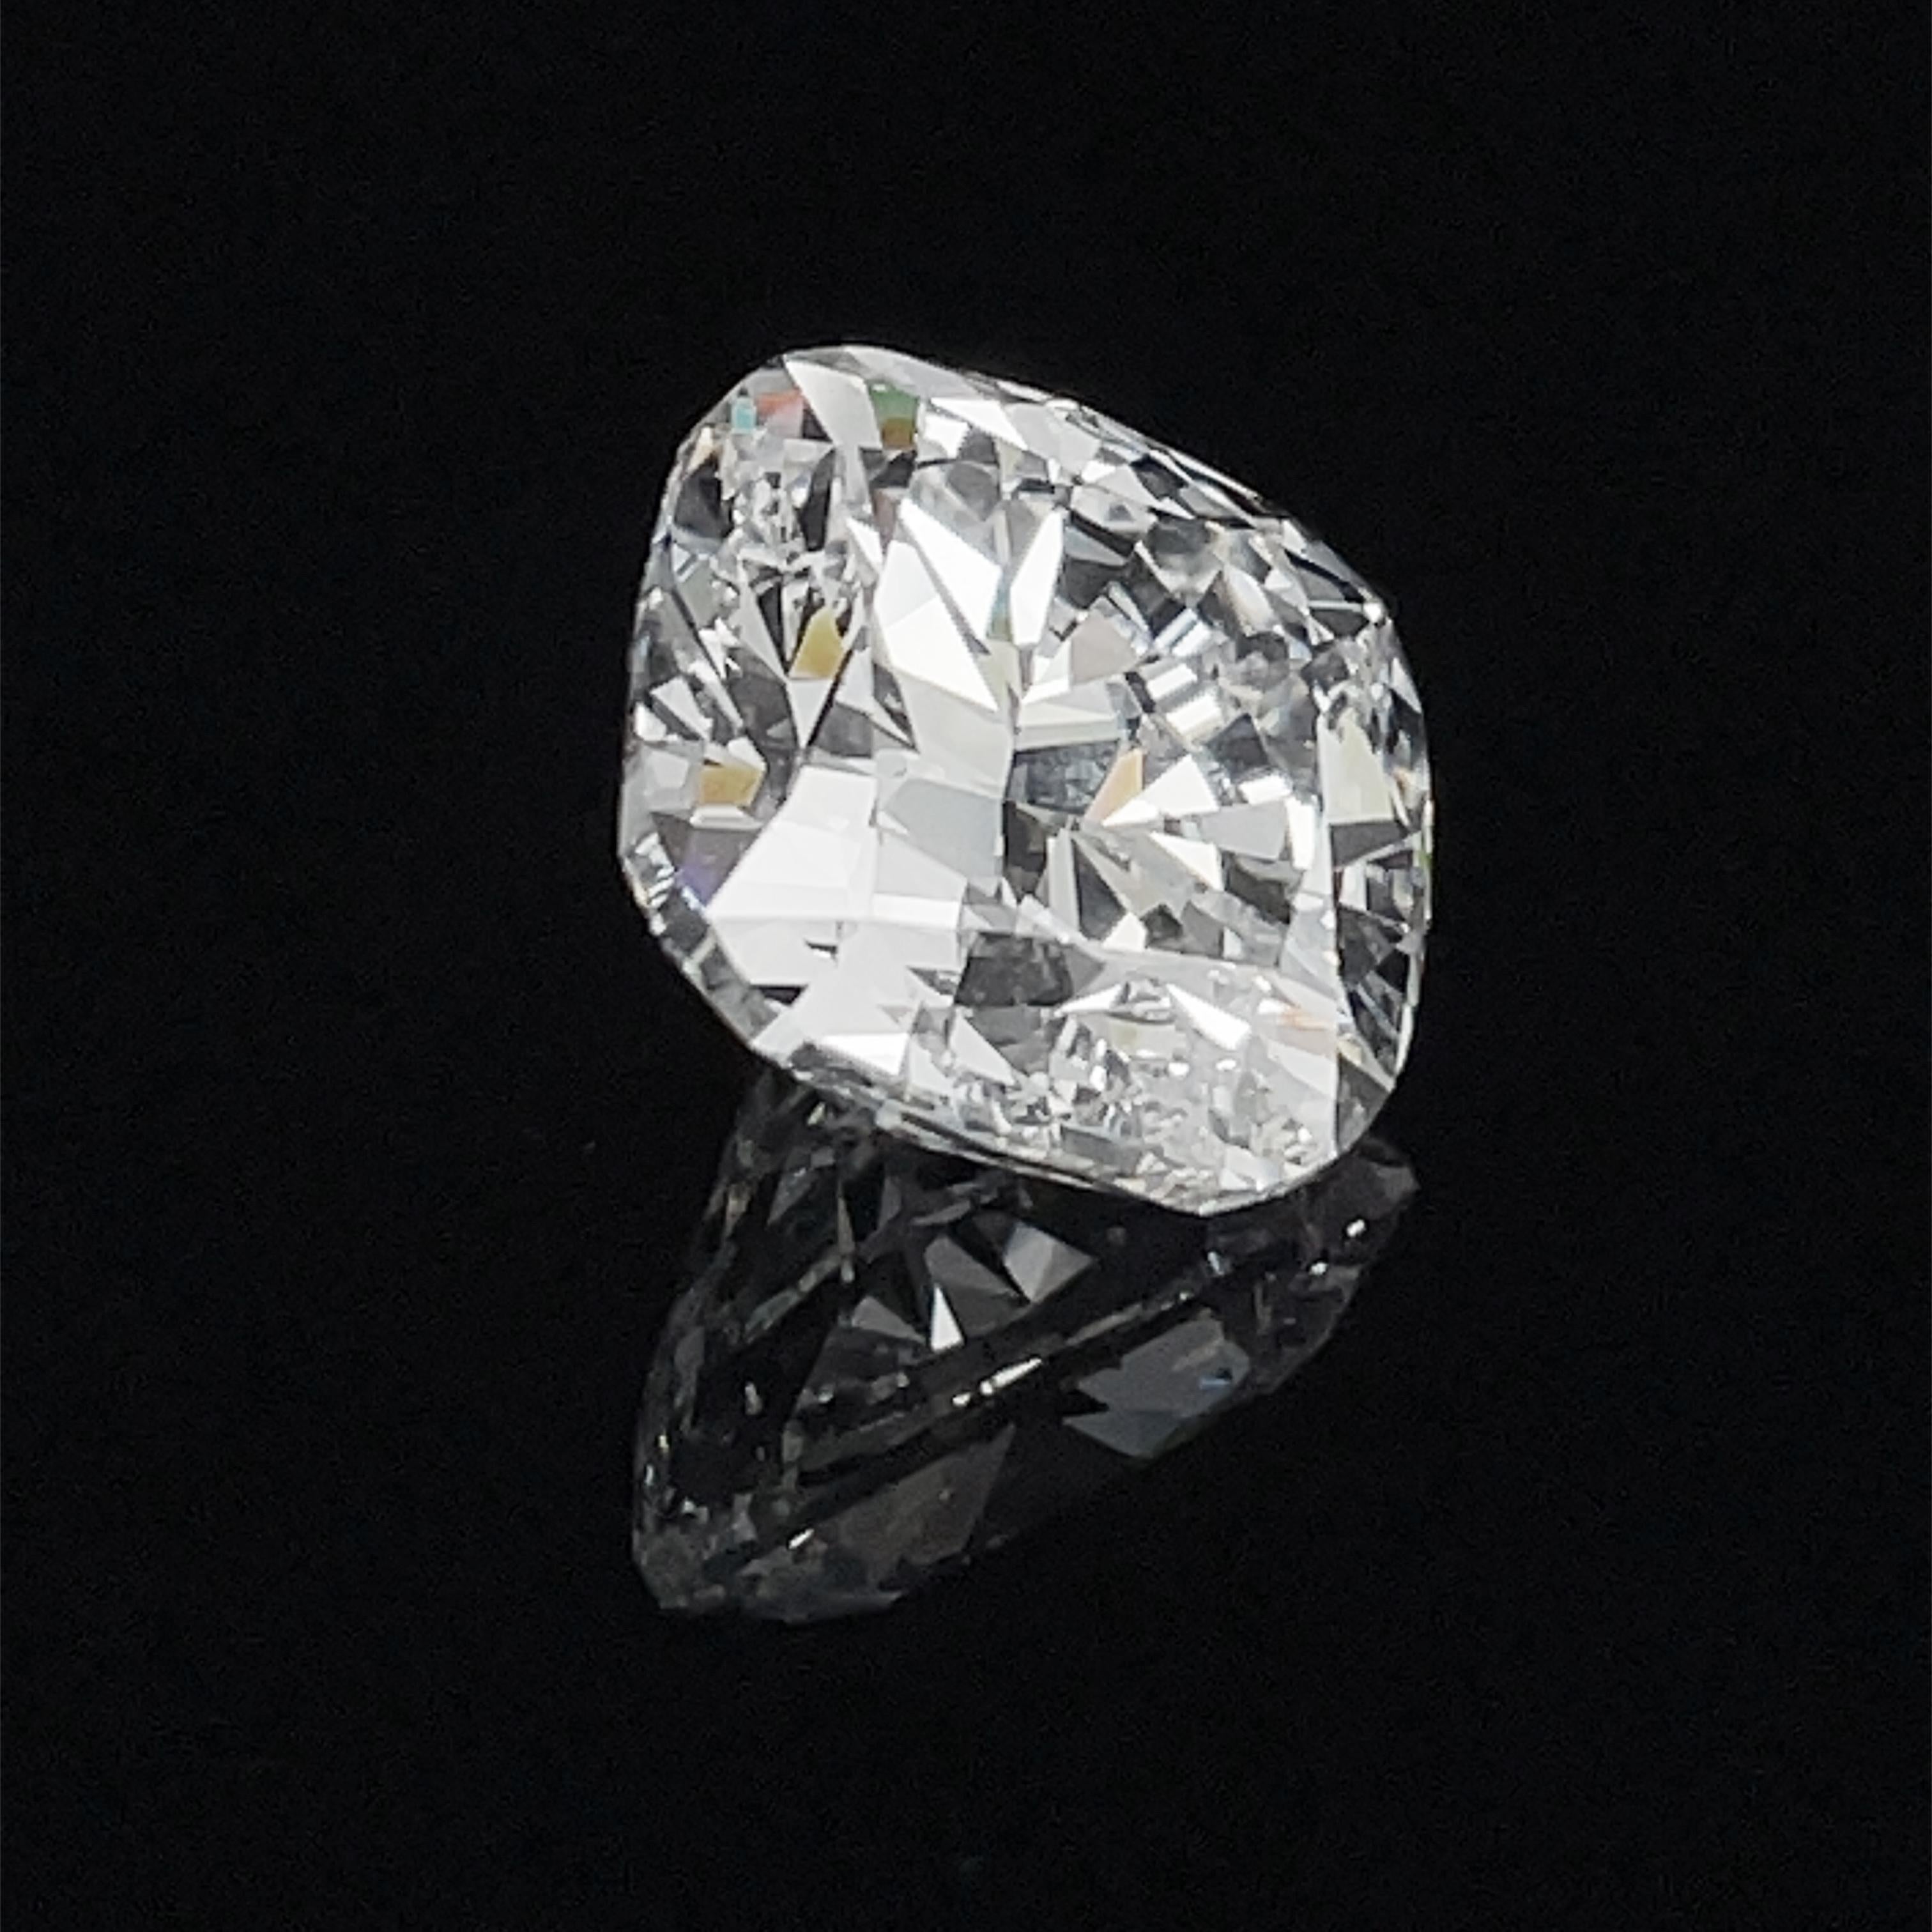 Accompanied by Gia Report 6173713950 stating that the diamond is D Color with Internally Flawless clarity. 
Please note that this listing is for a Loose Unmounted Stone only.

We are a family-owned diamond wholesaler in NYC for over 25 years,